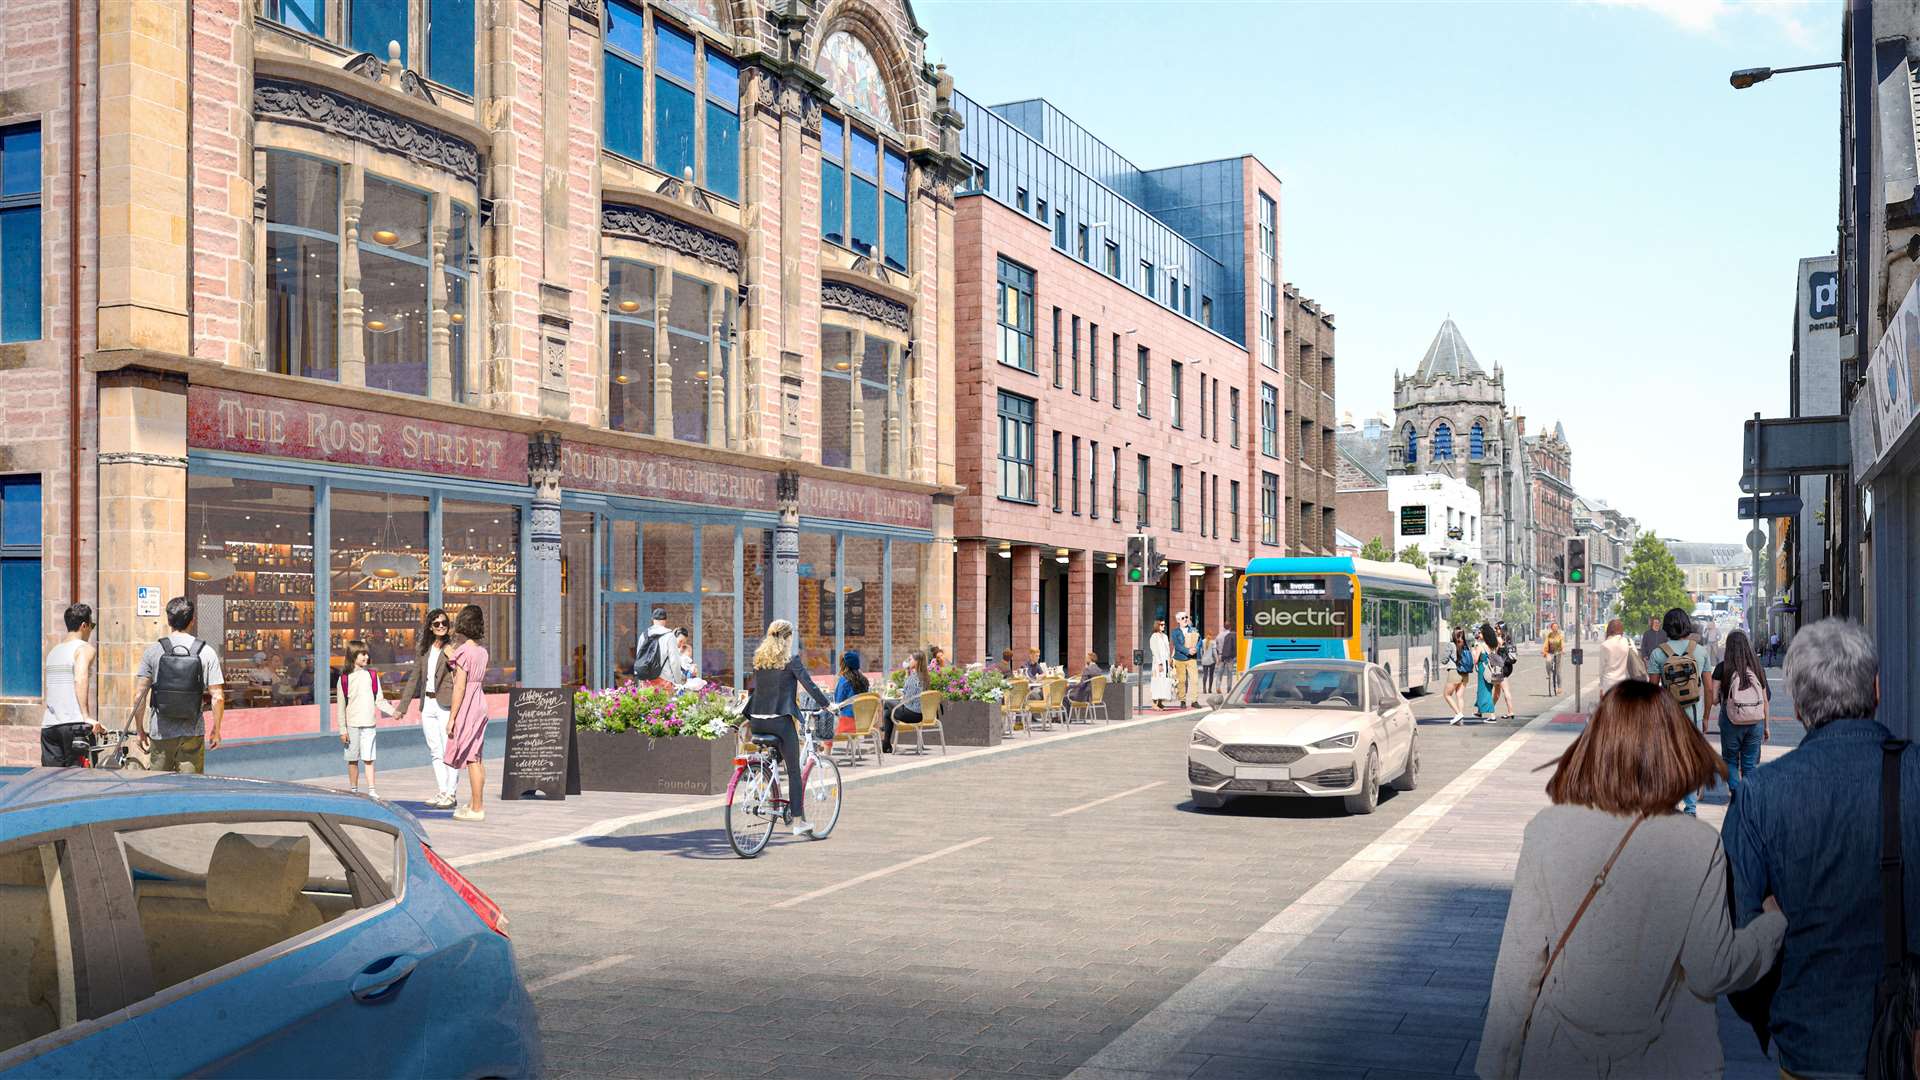 Proposals for change on Academy Street continue to be controversial.